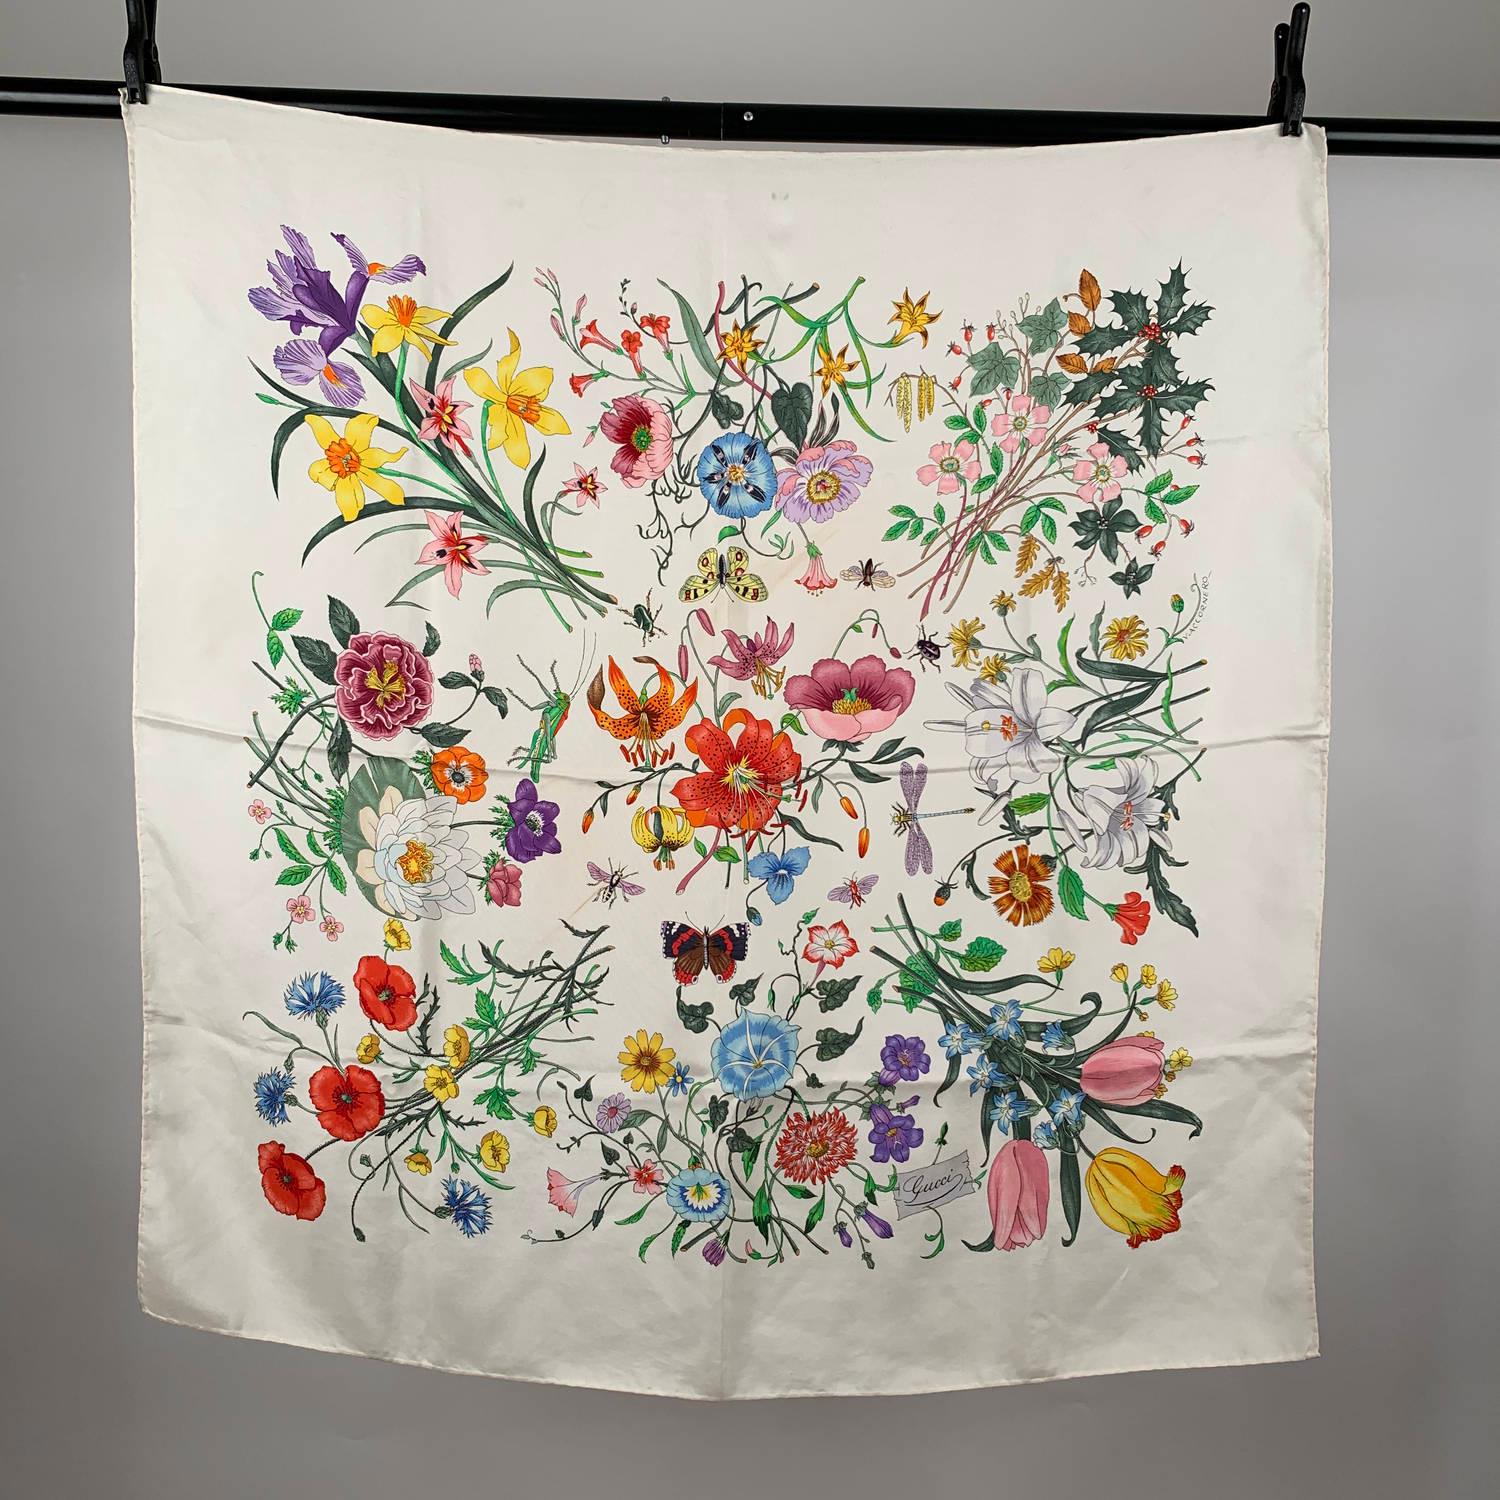 Gucci Vintage White Floral Silk Scarf Flora 1966 Accornero

The Flora silk scarf born in 1966 by the scenographer Vittorio Accornero. He was the textile disegner for Gucci between the 1960s and 1981.  The Flora design is a magical and delicate